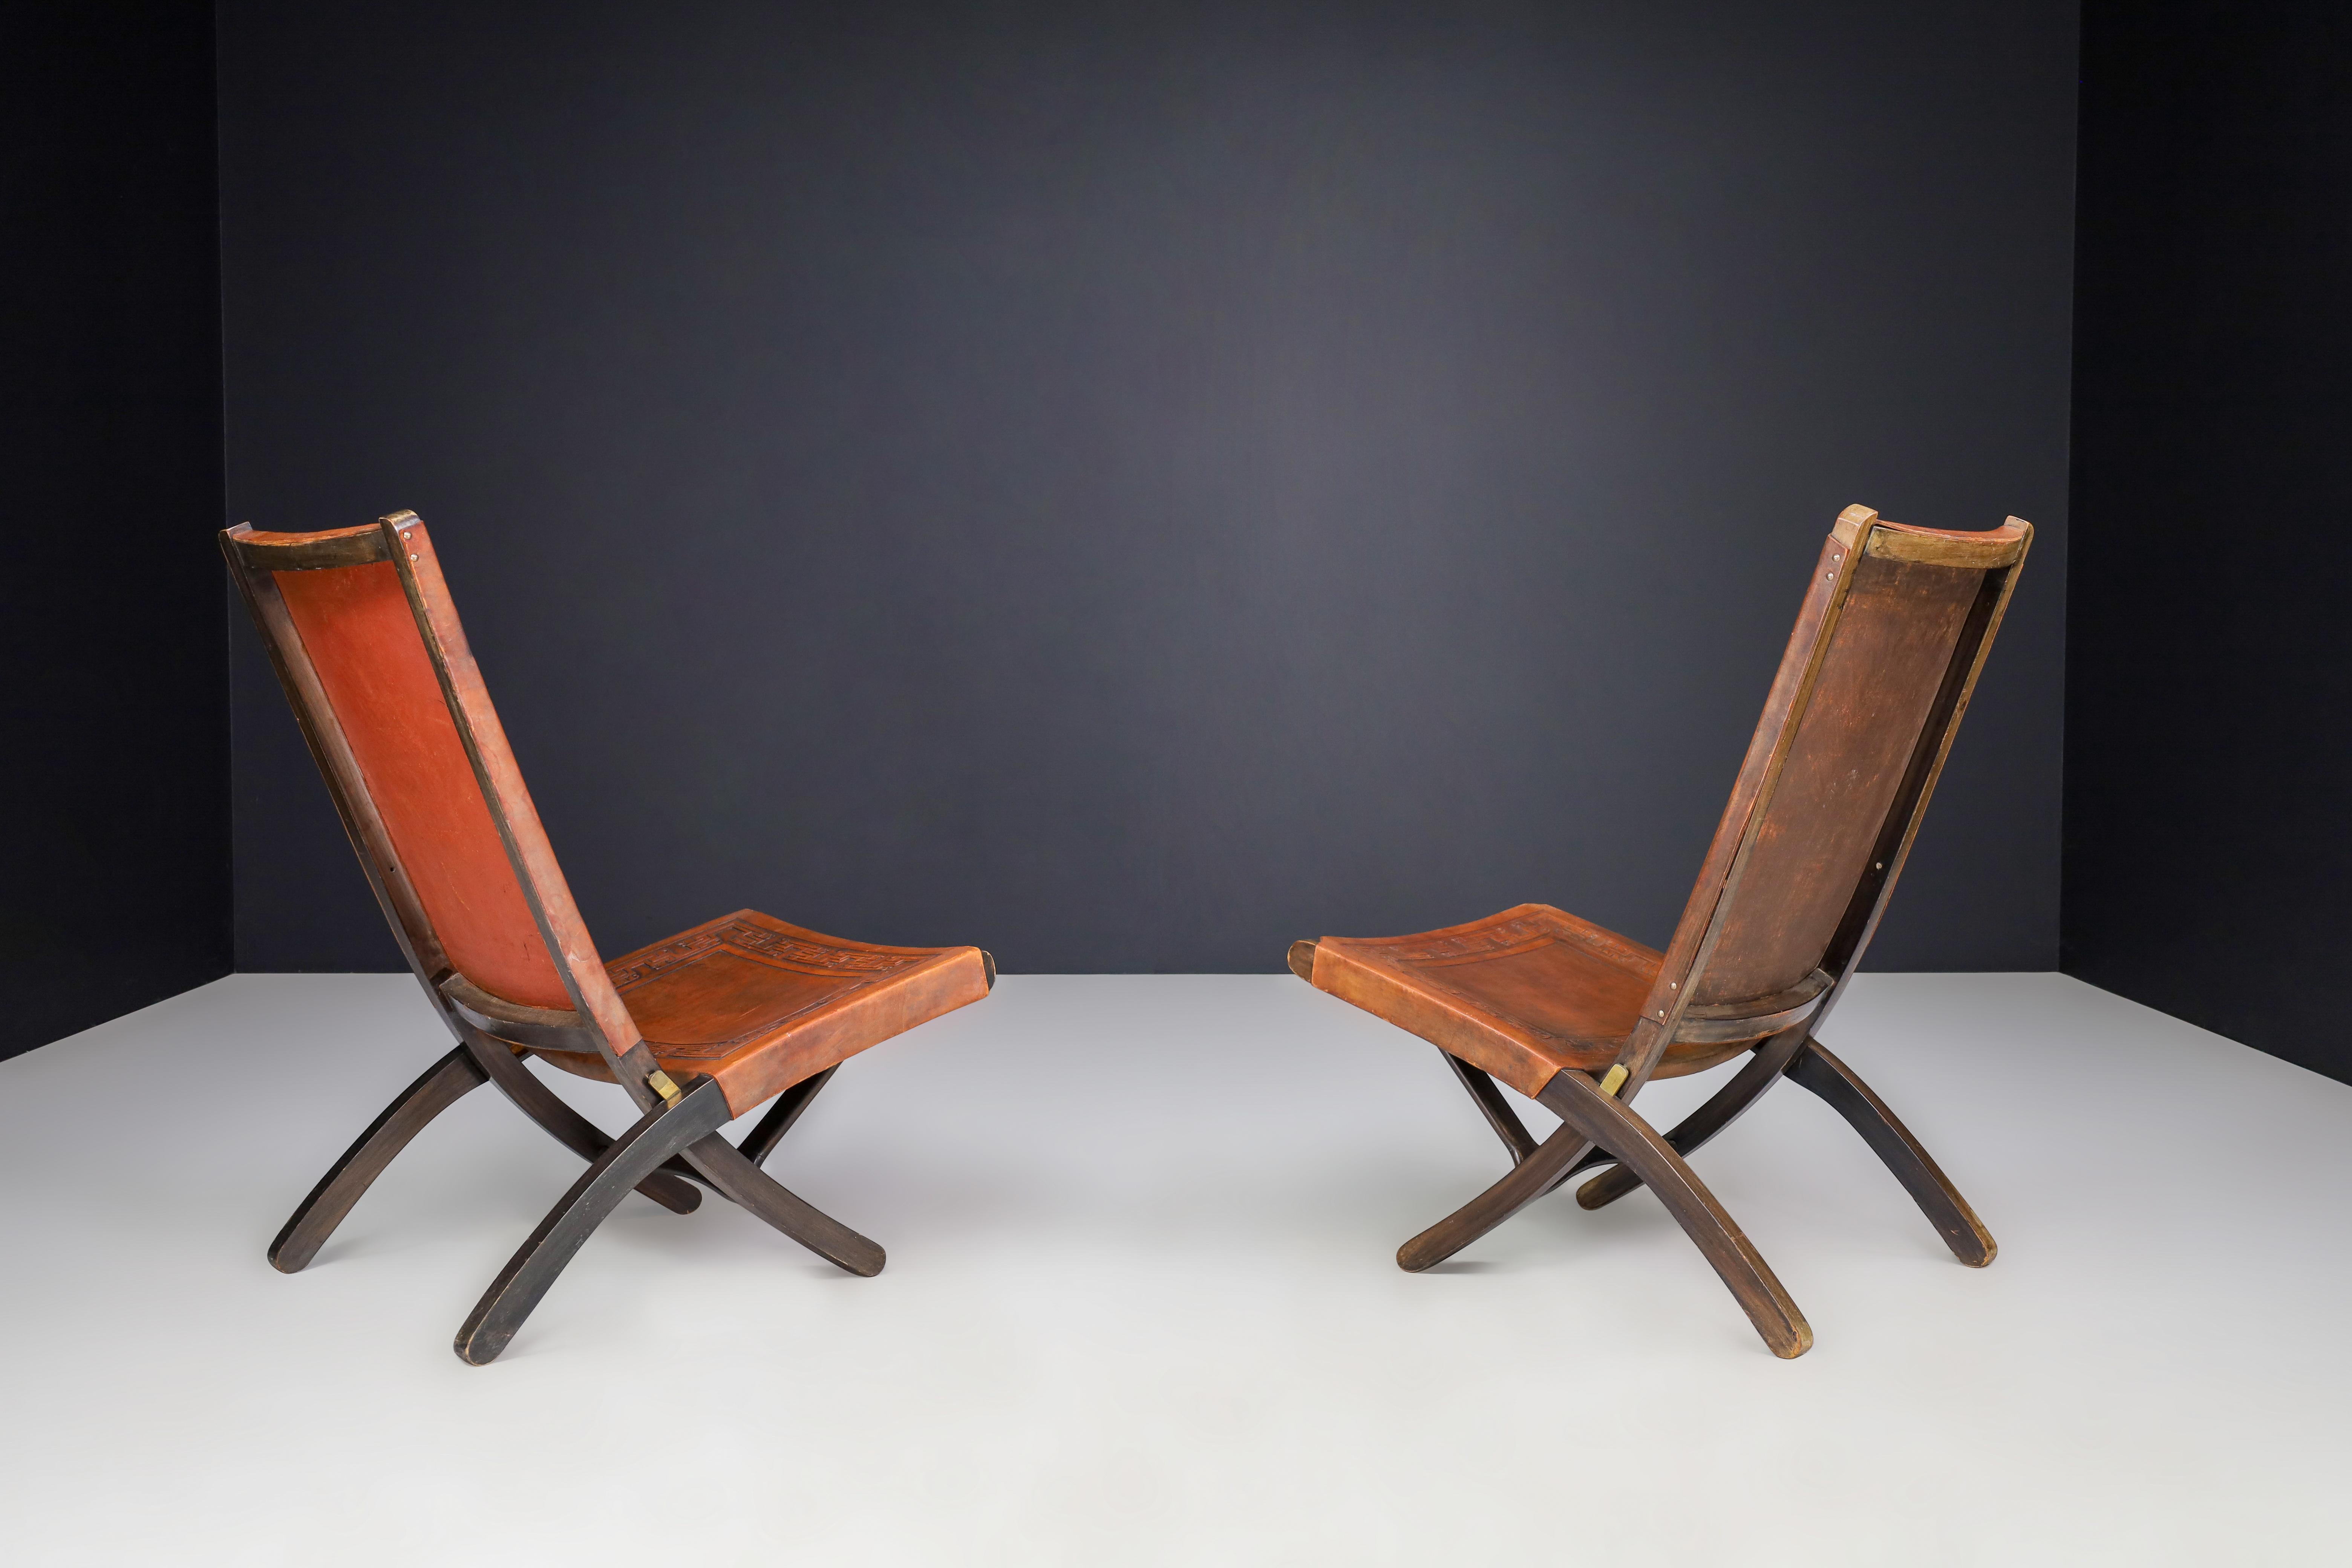 Late 20th Century Angel I. Pazmino Cognac-colored Saddle Leather Folding Chairs Ecuador 1970s   For Sale